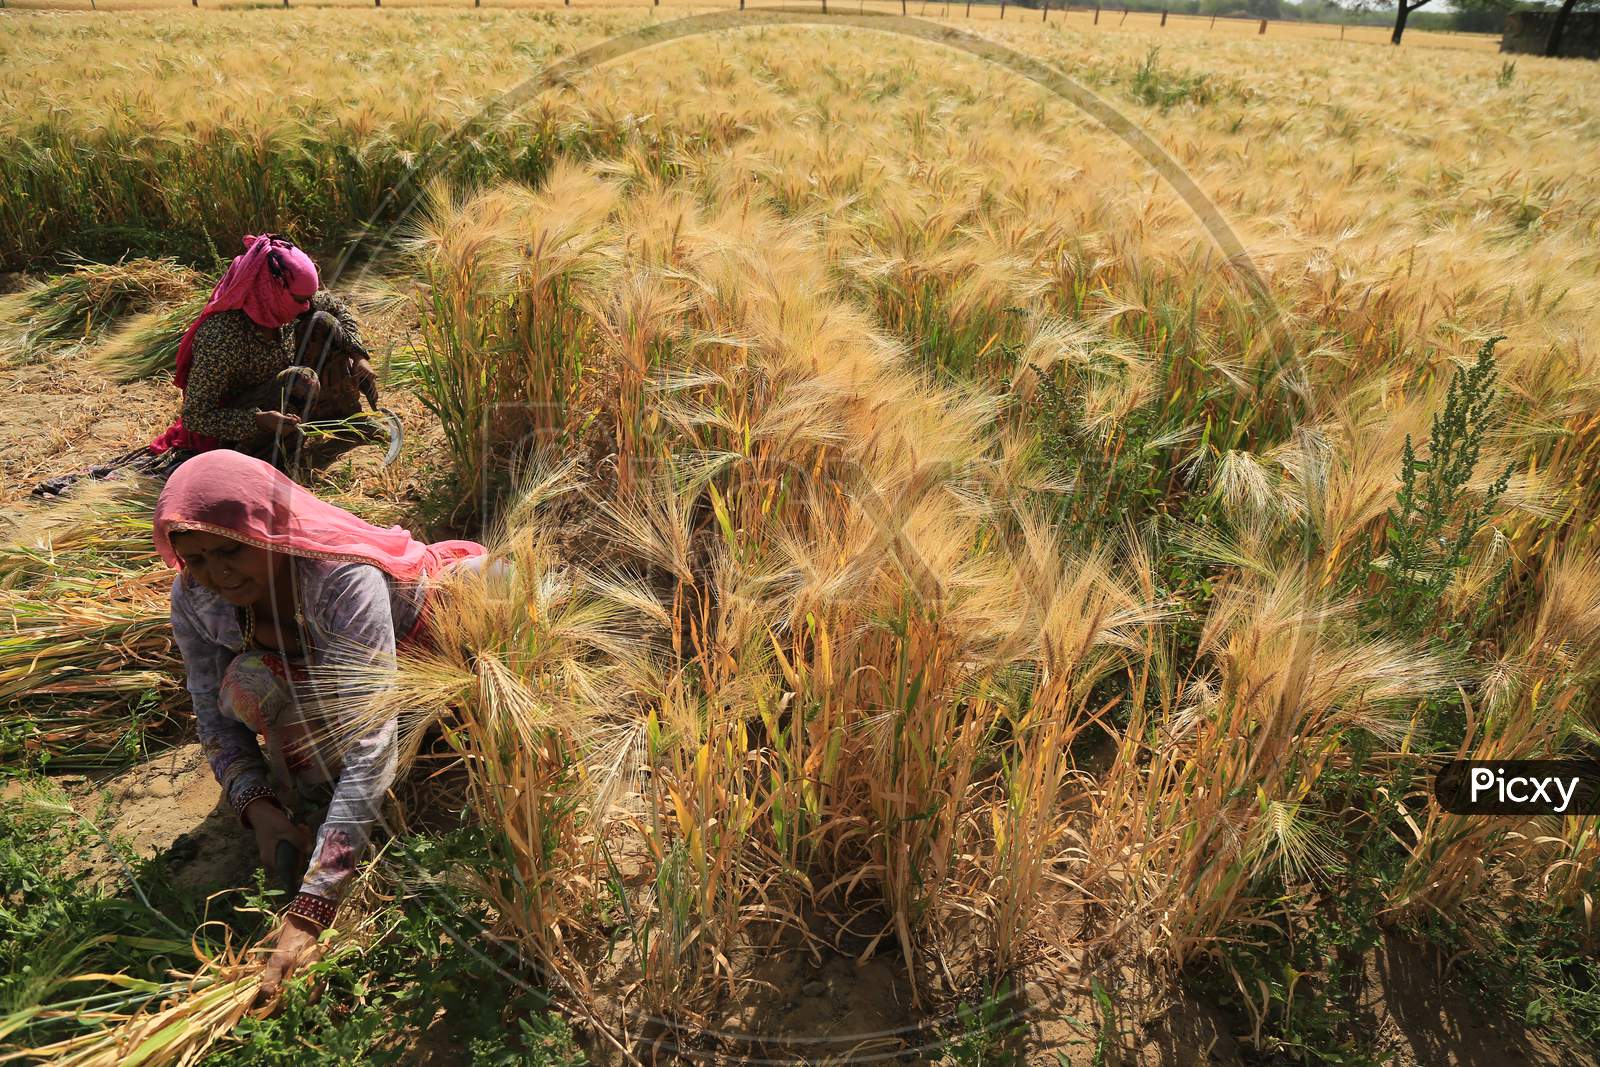 Farmer Harvests Wheat Crop In The Outskirts Village Of Ajmer Rajasthan, India On 24 March 2019.